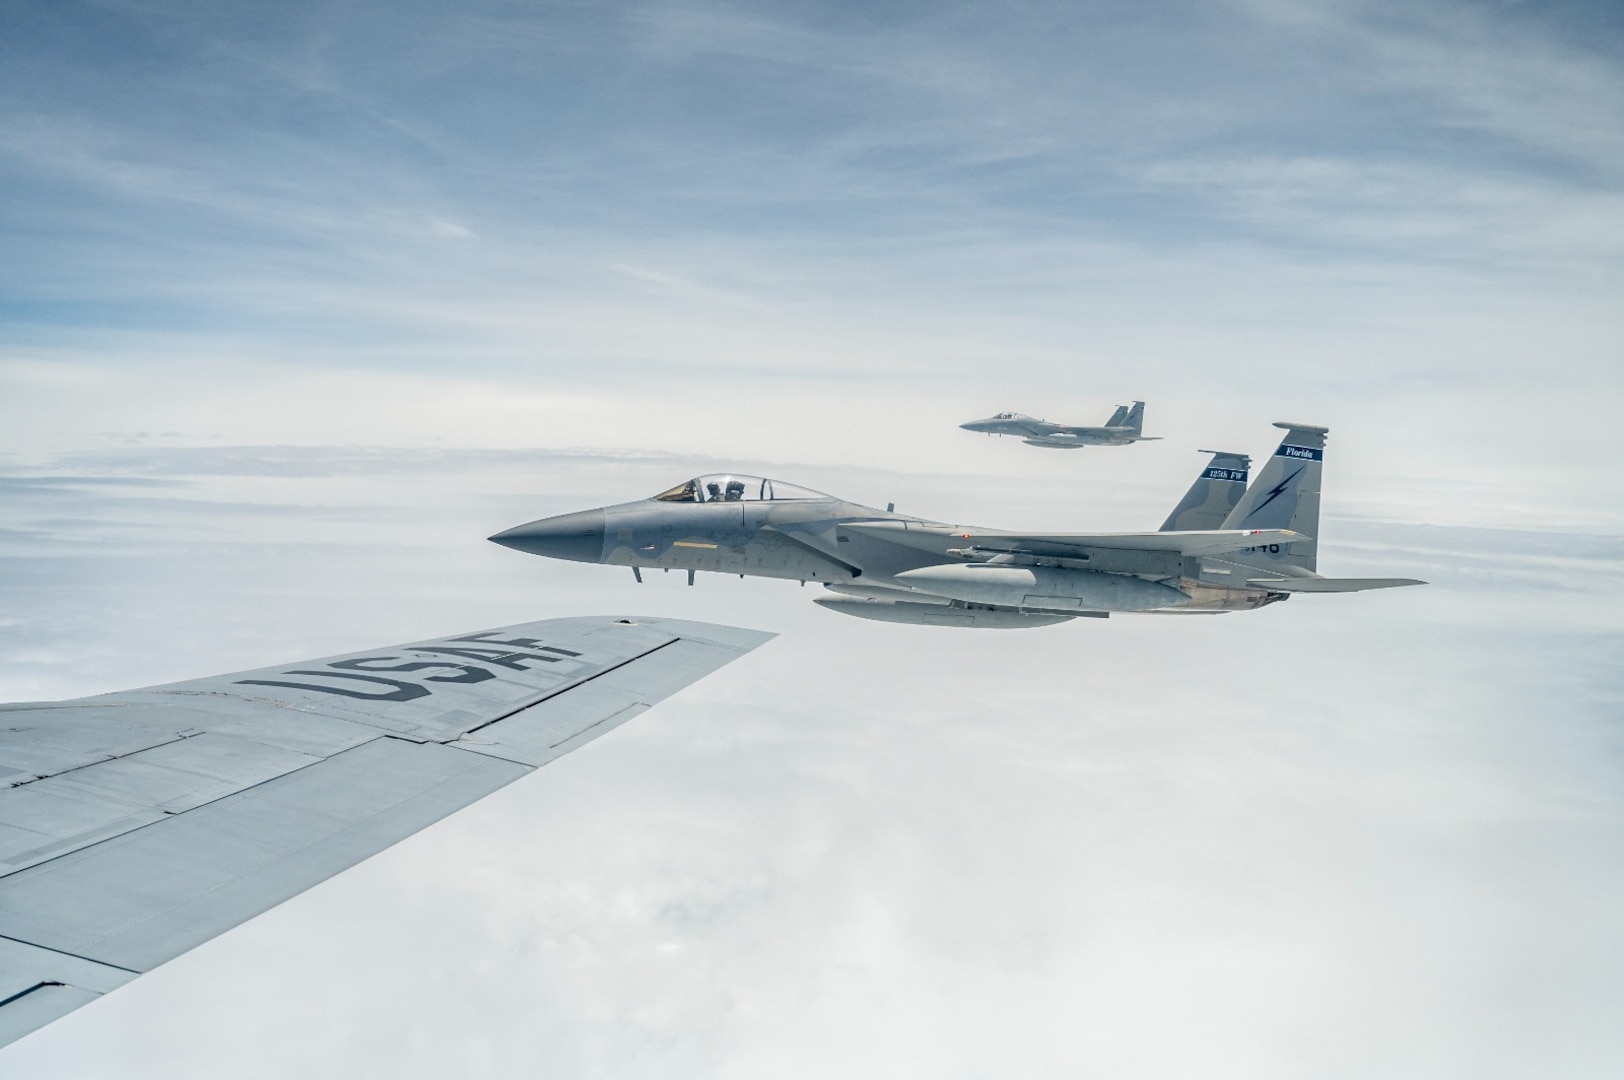 An F-15 from the Florida Air National Guard’s 125th Fighter Wing takes on fuel mid-air during exercise Relámpago VIII in Colombia, Aug. 21, 2023. his Colombian and U.S. training opportunity offers real-world benefits to U.S. and partner nation military personnel and the people of Colombia by promoting readiness. (U.S. Air Force photo by Staff Sgt. Matthew Matlock)